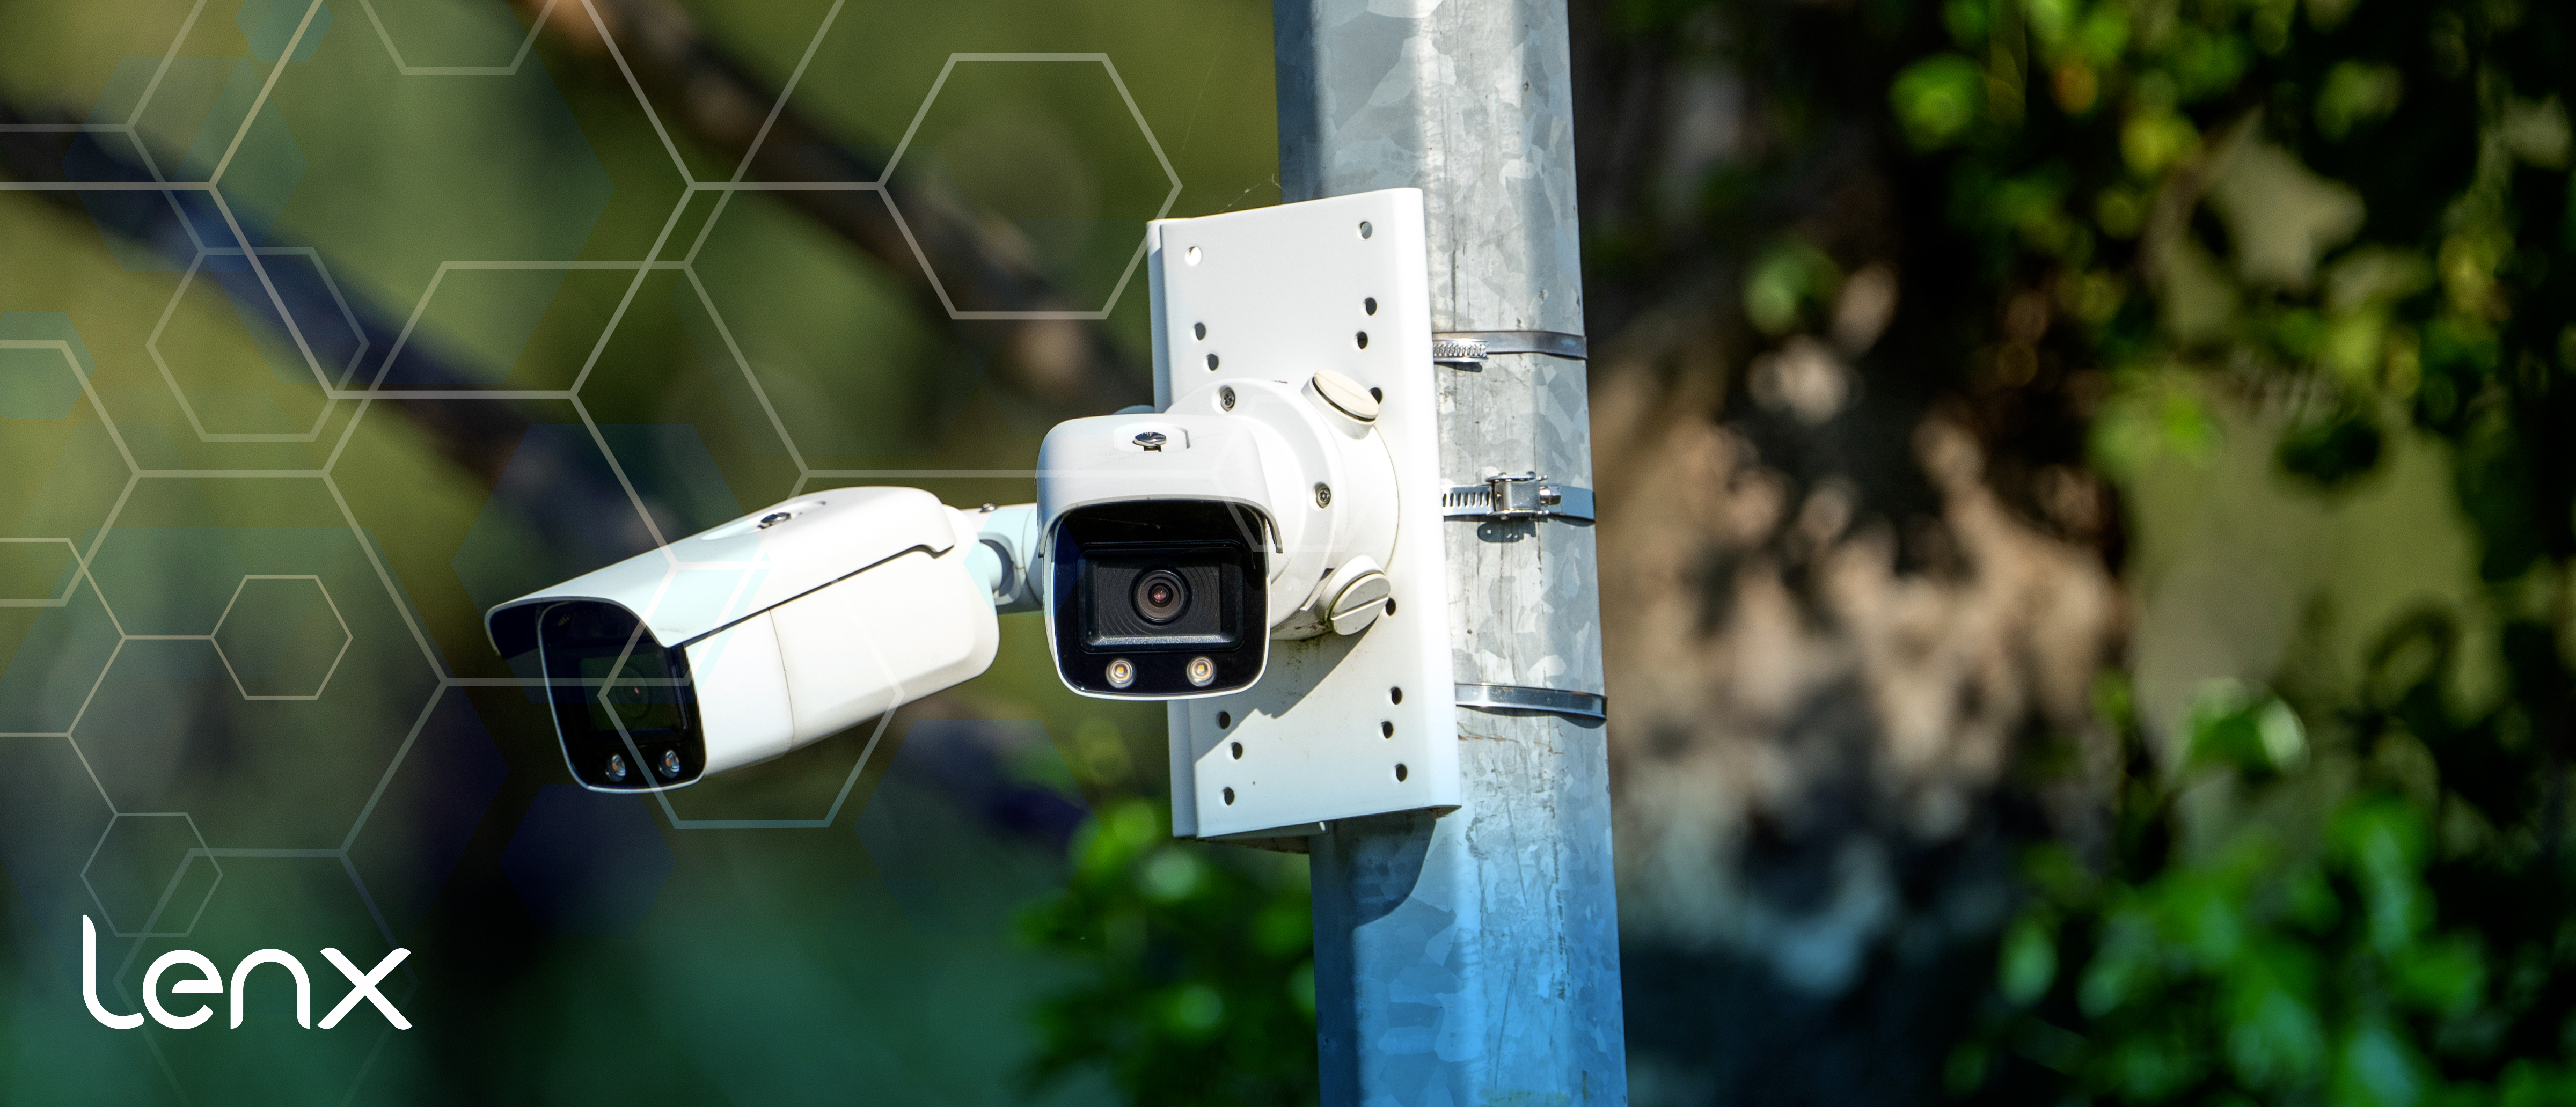 What To Look For In AI Security, Active Shooter Detection System Providers